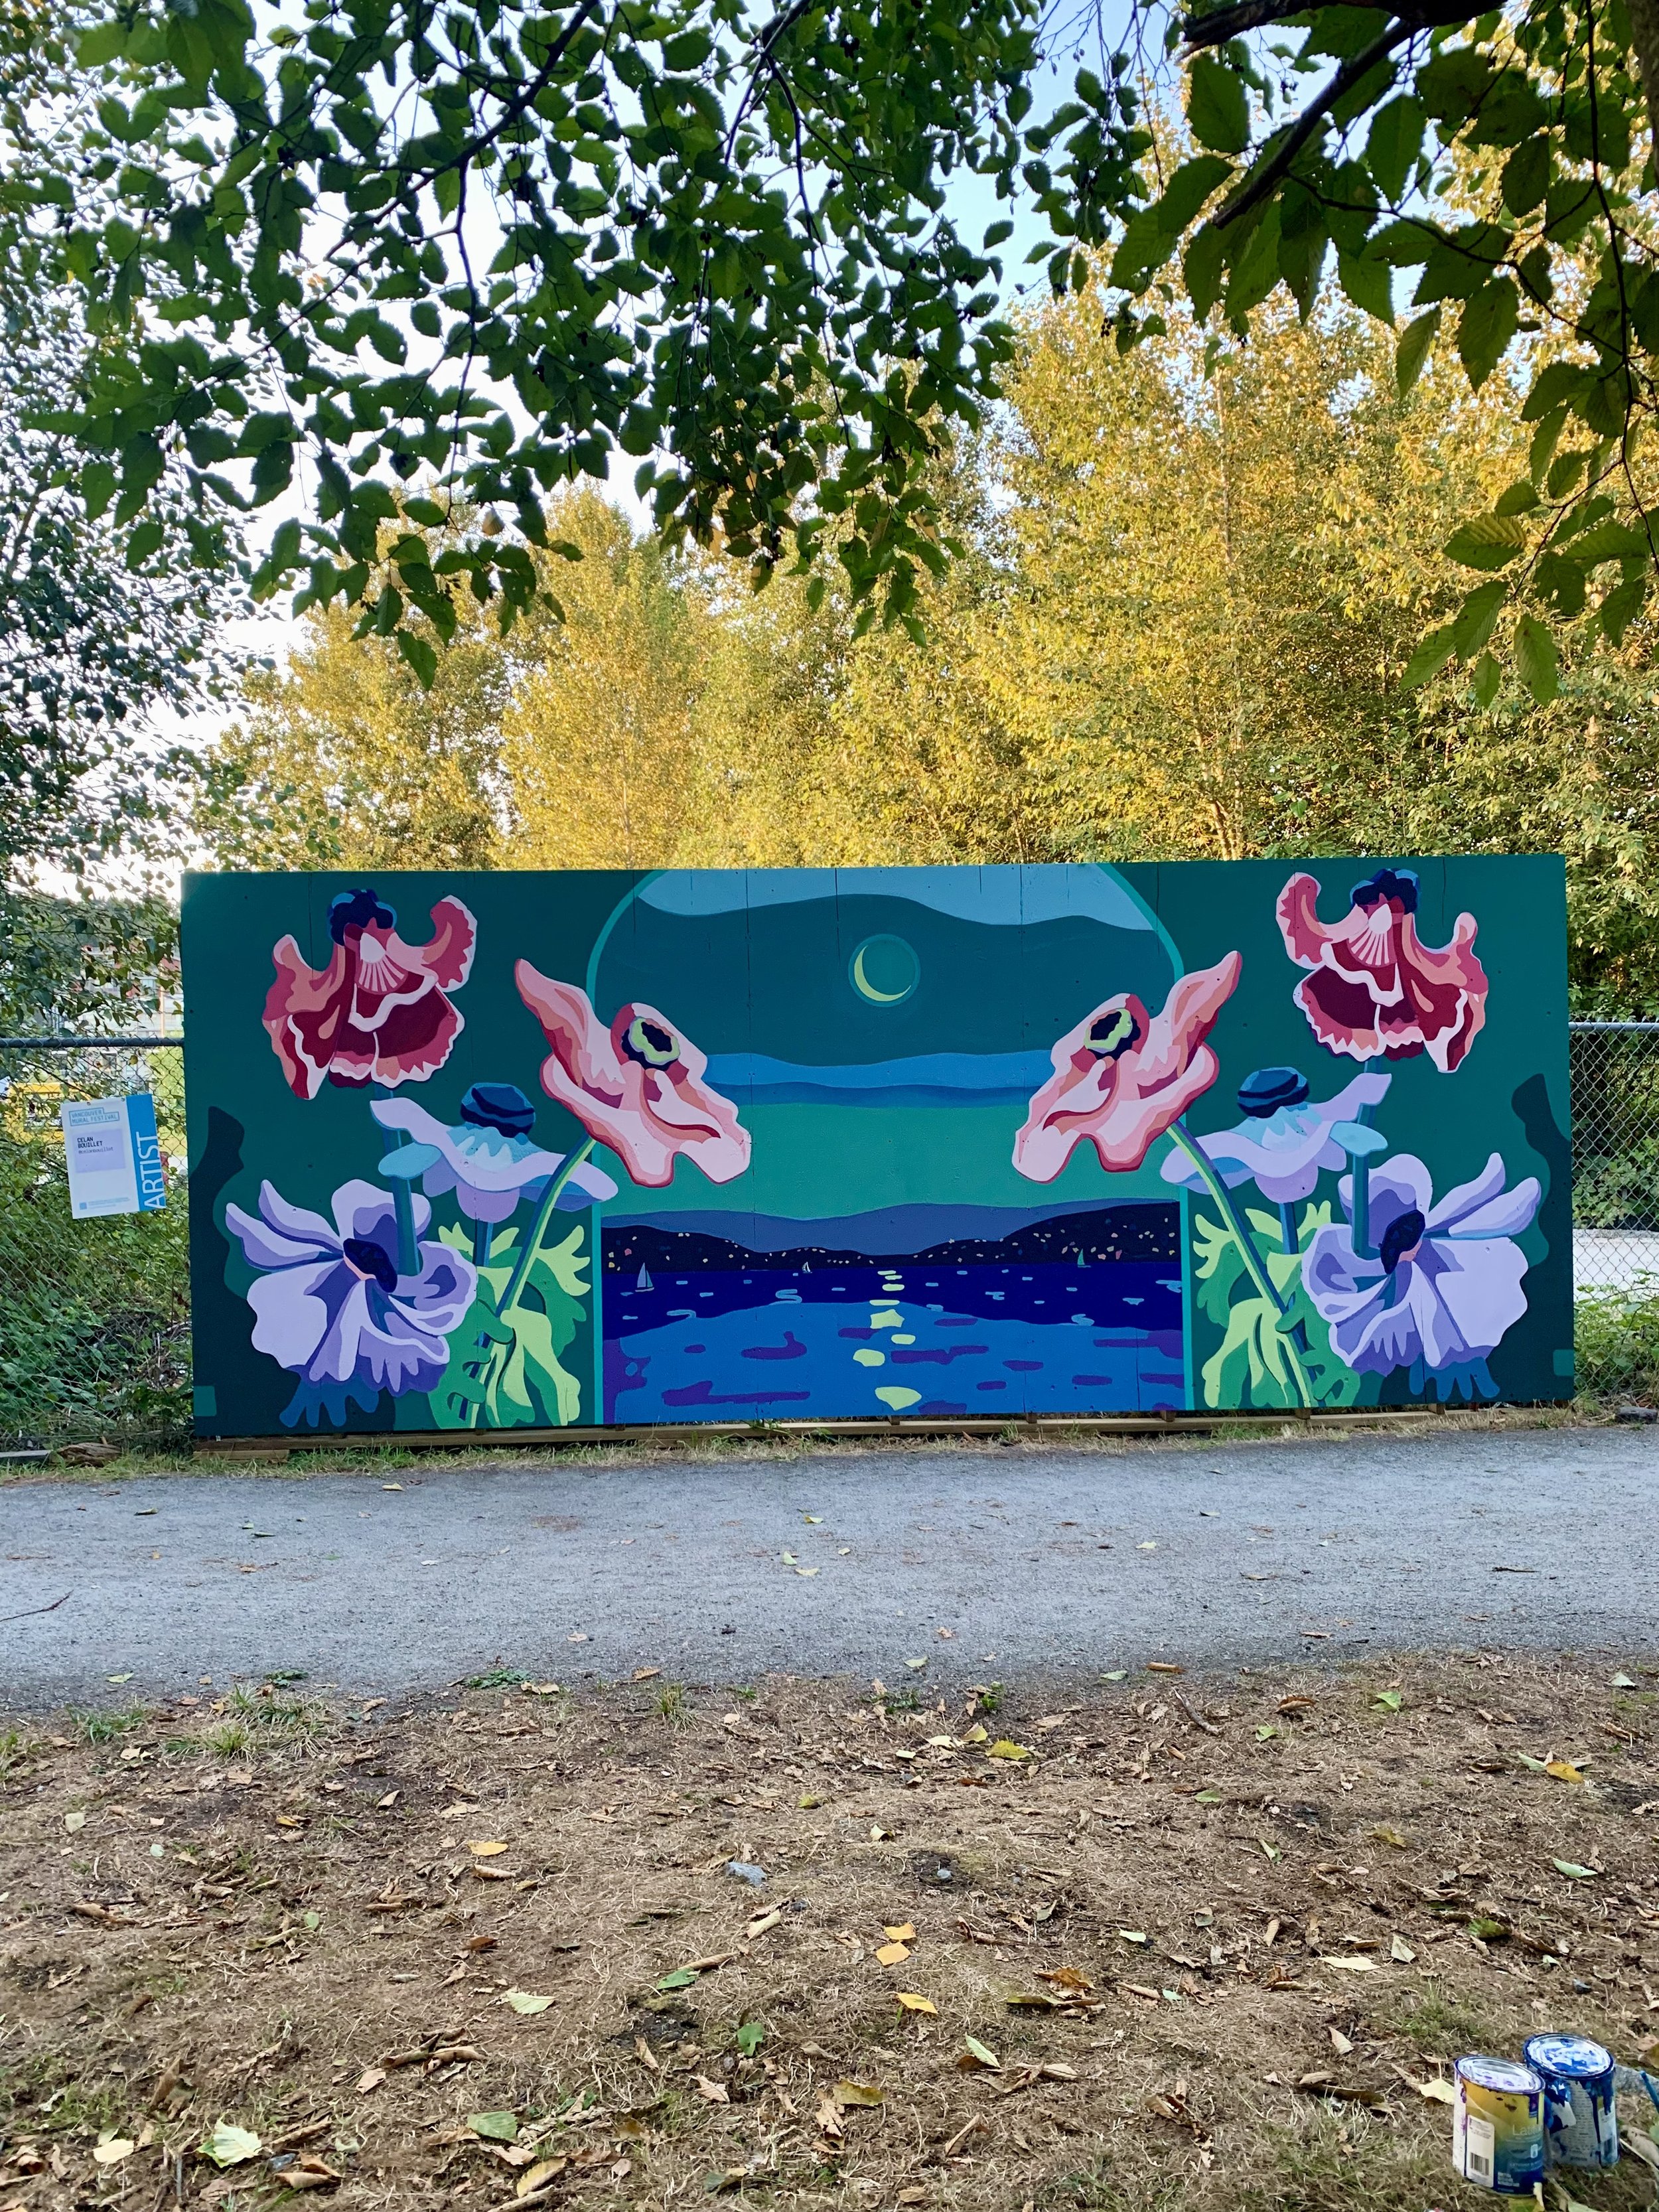  "Love Letter to the Moon" Mural  in Vancouver, BC  